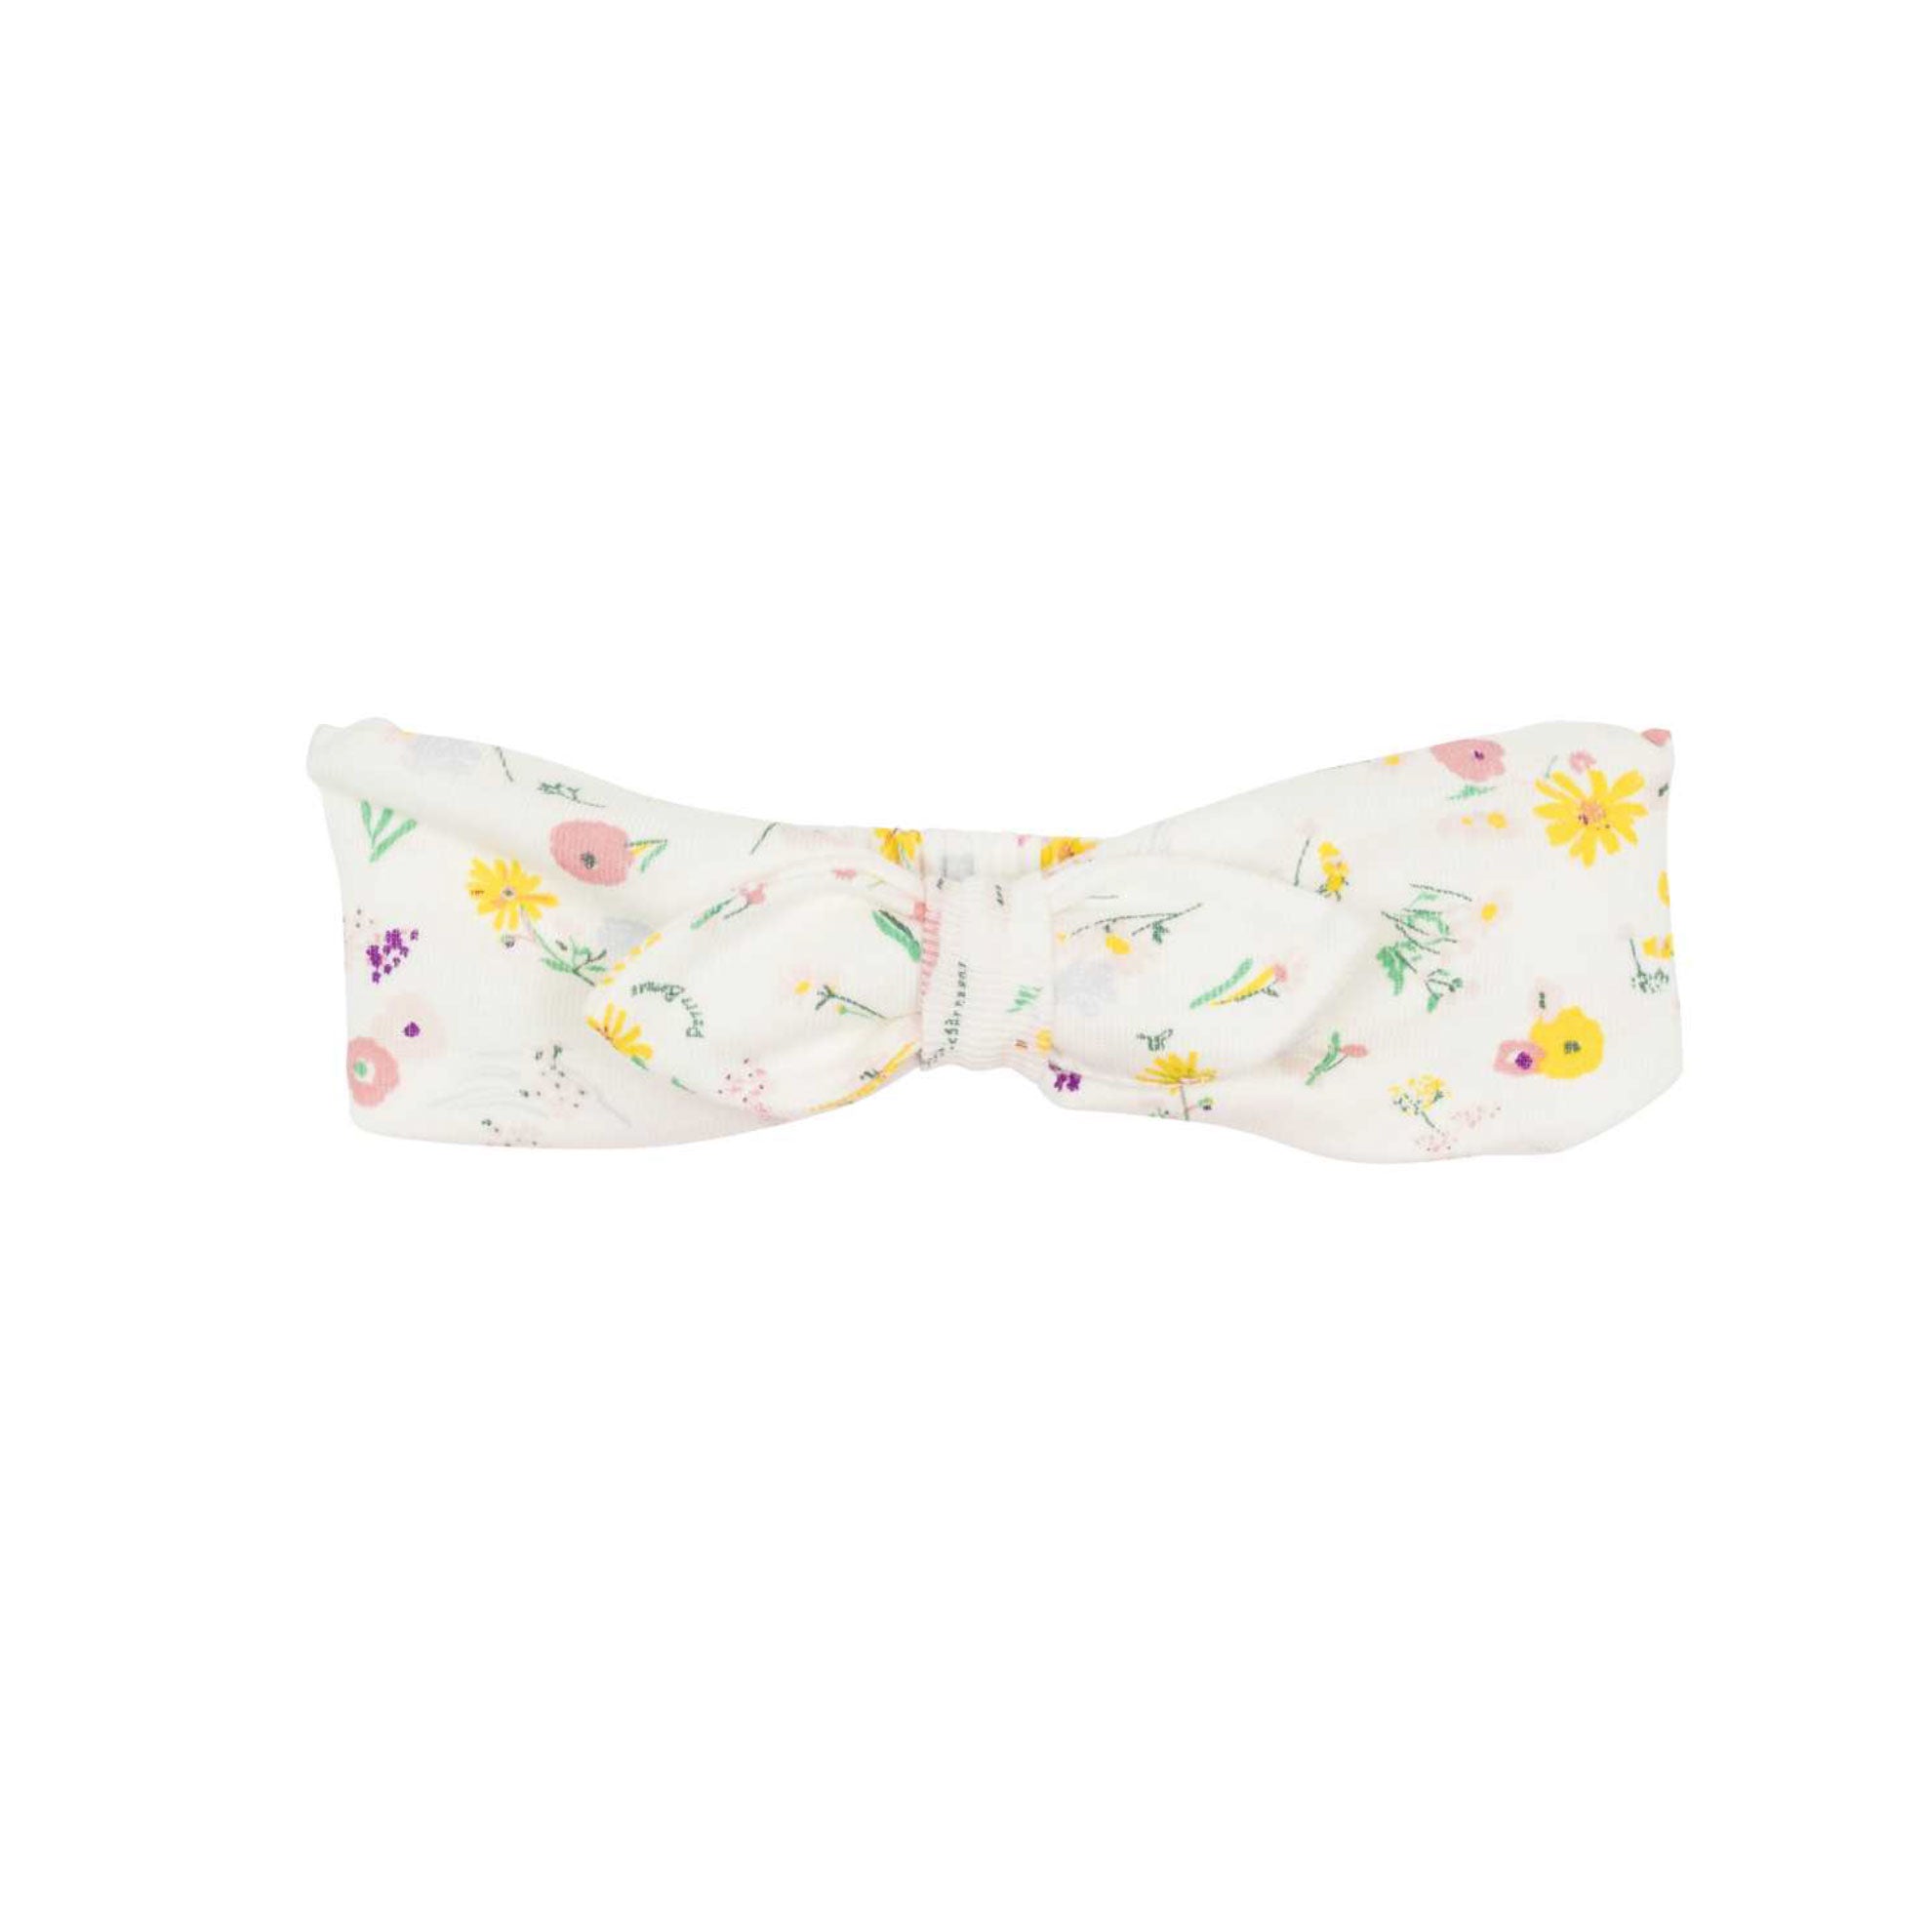 Petit Bateau Baby Headband with flowers at Bonjour Baby Baskets